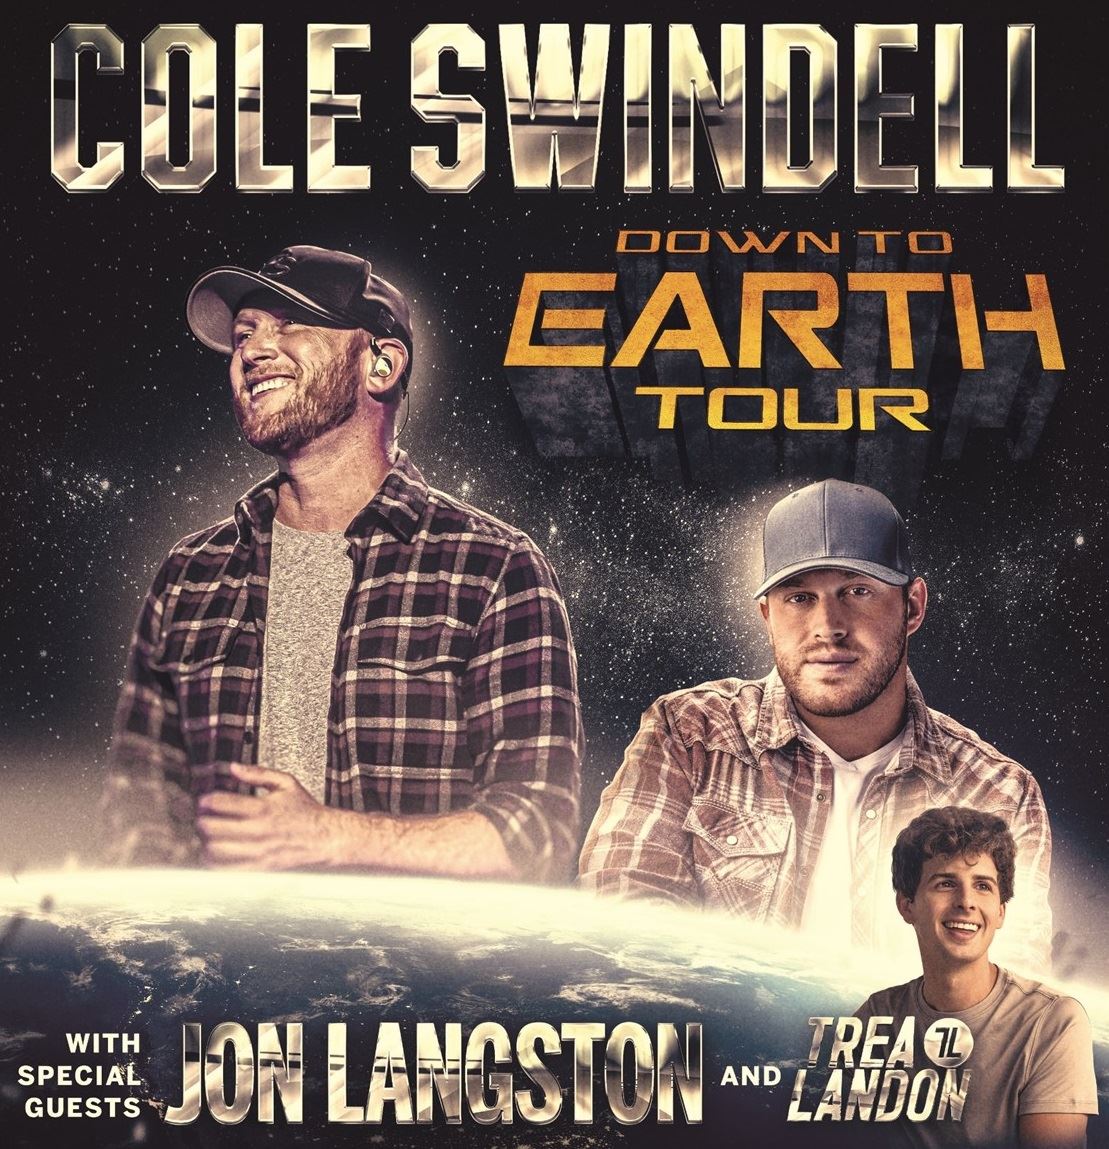 Cole Swindell – Down To Earth Tour Concert, Oct. 23, 2020